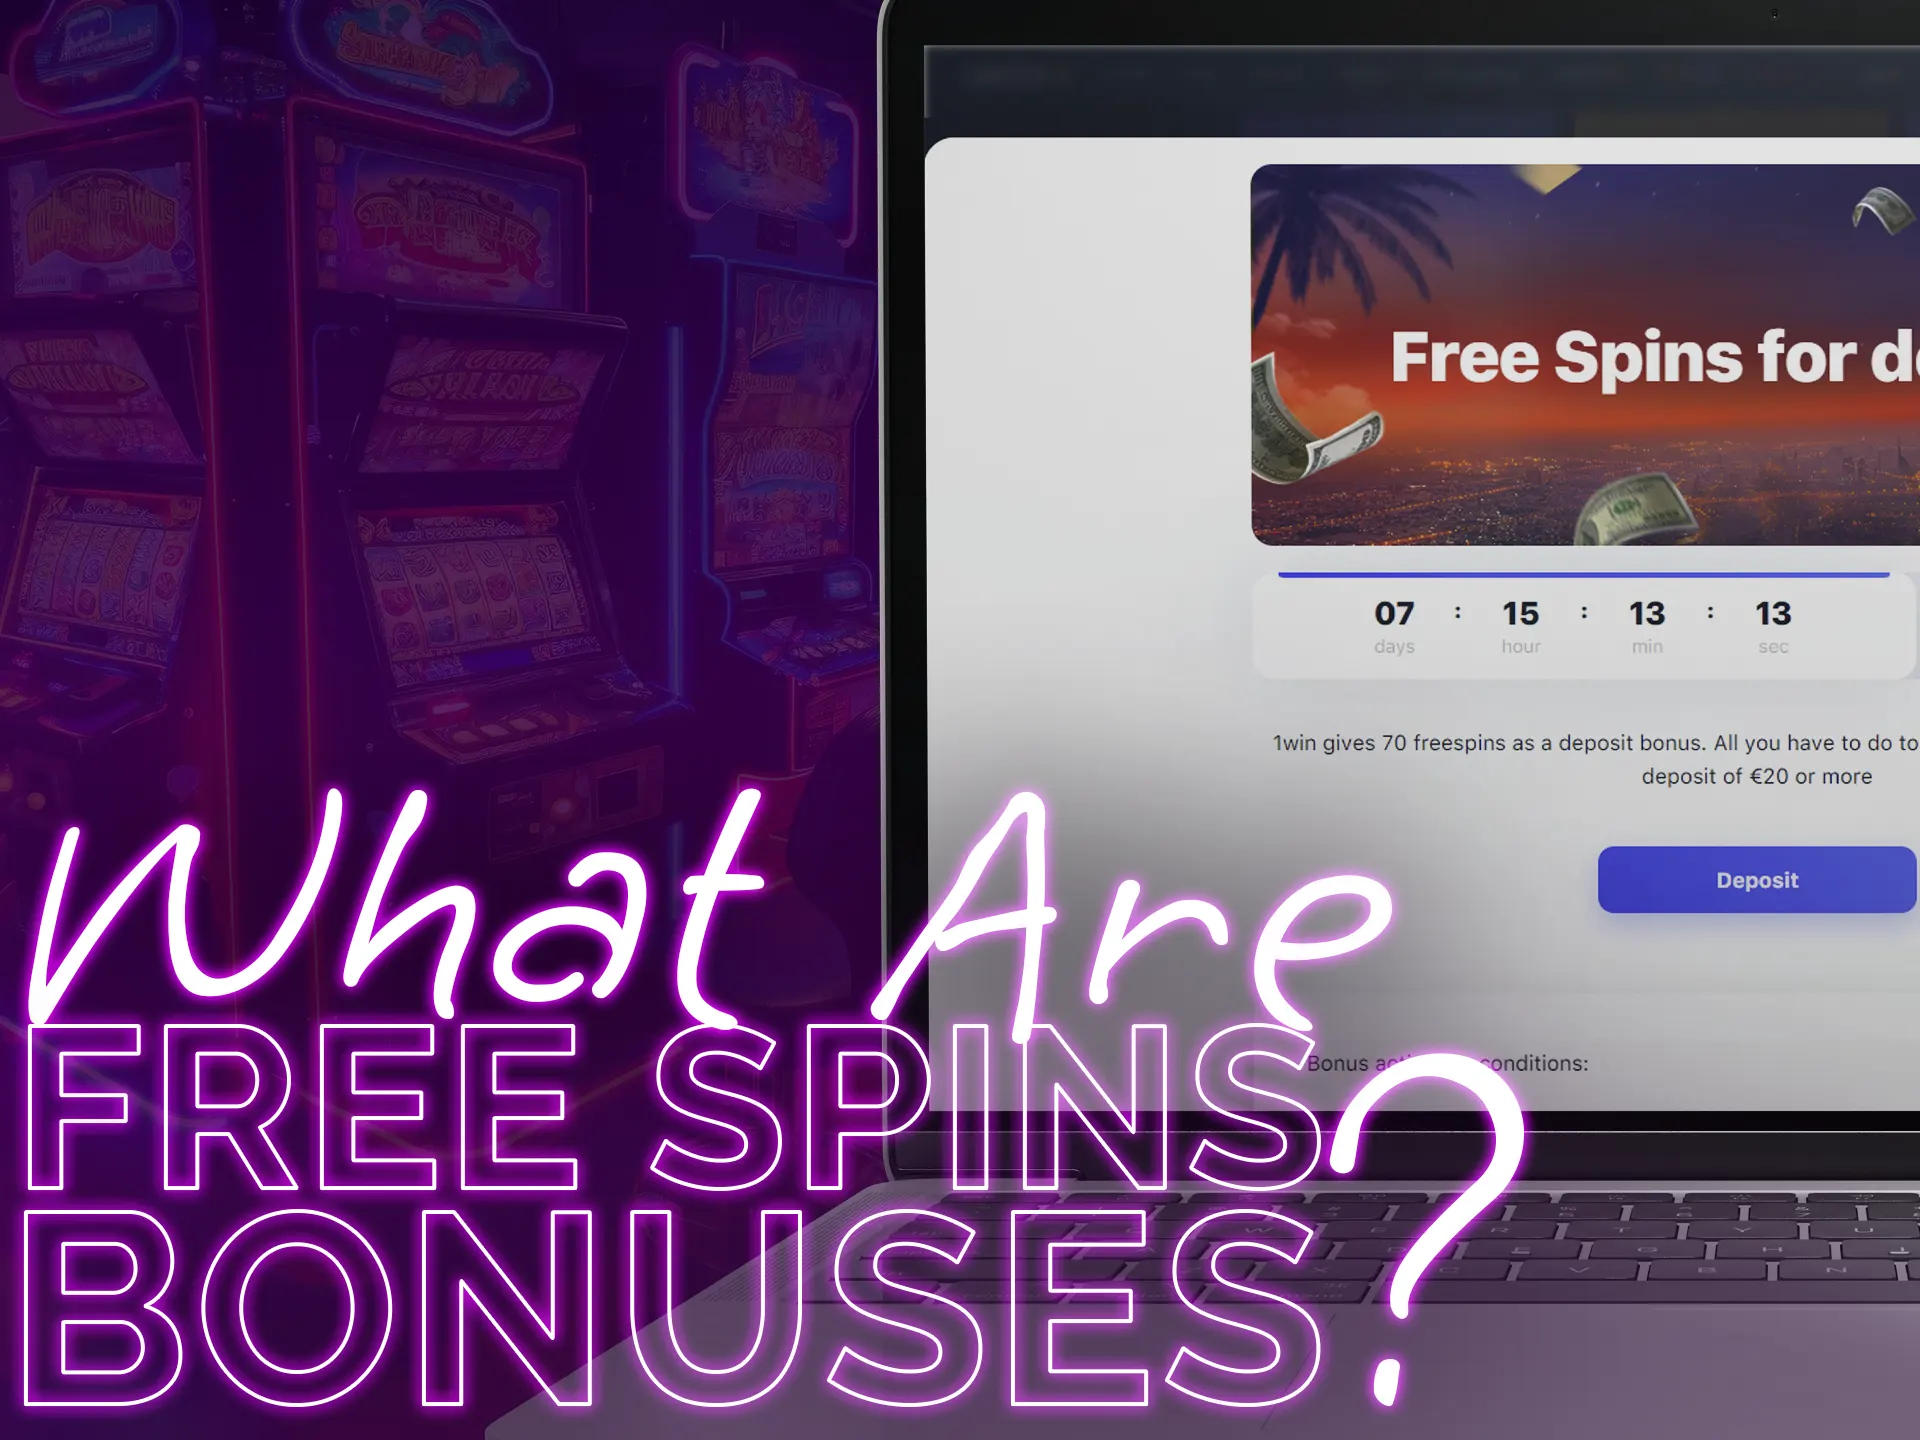 Learn what free spins bonuses are.